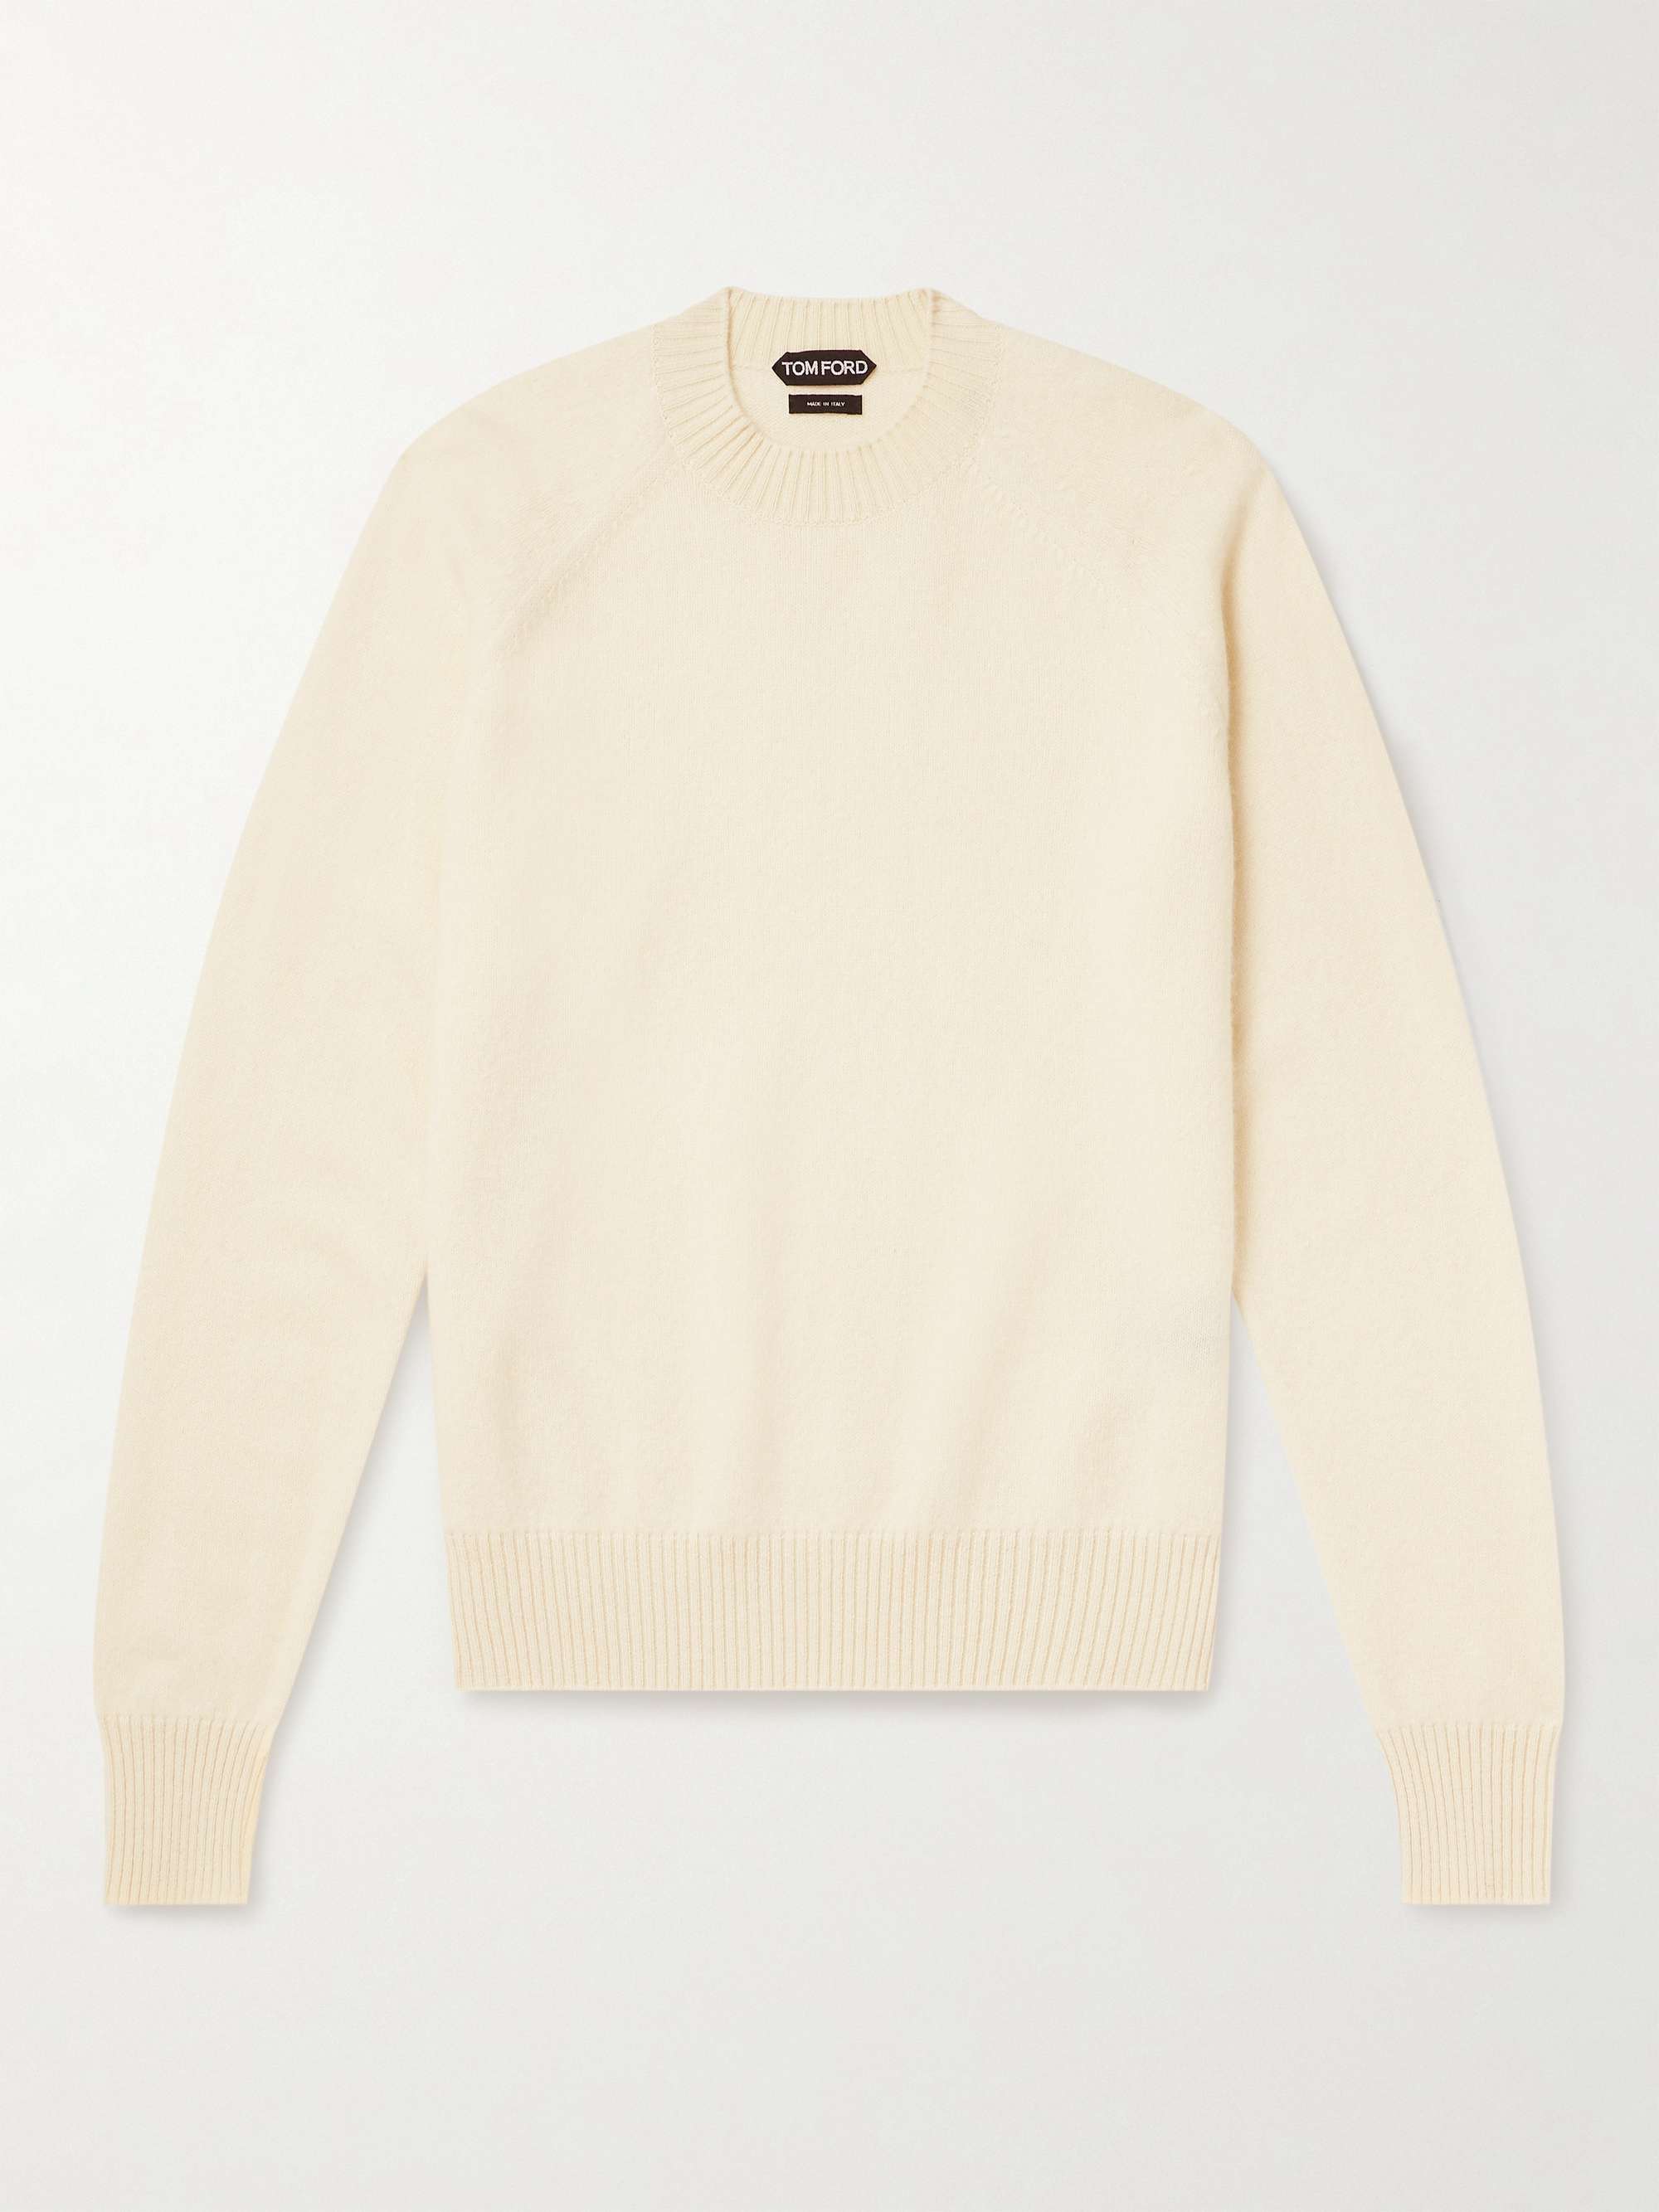 TOM FORD Wool and Cashmere-Blend Sweater